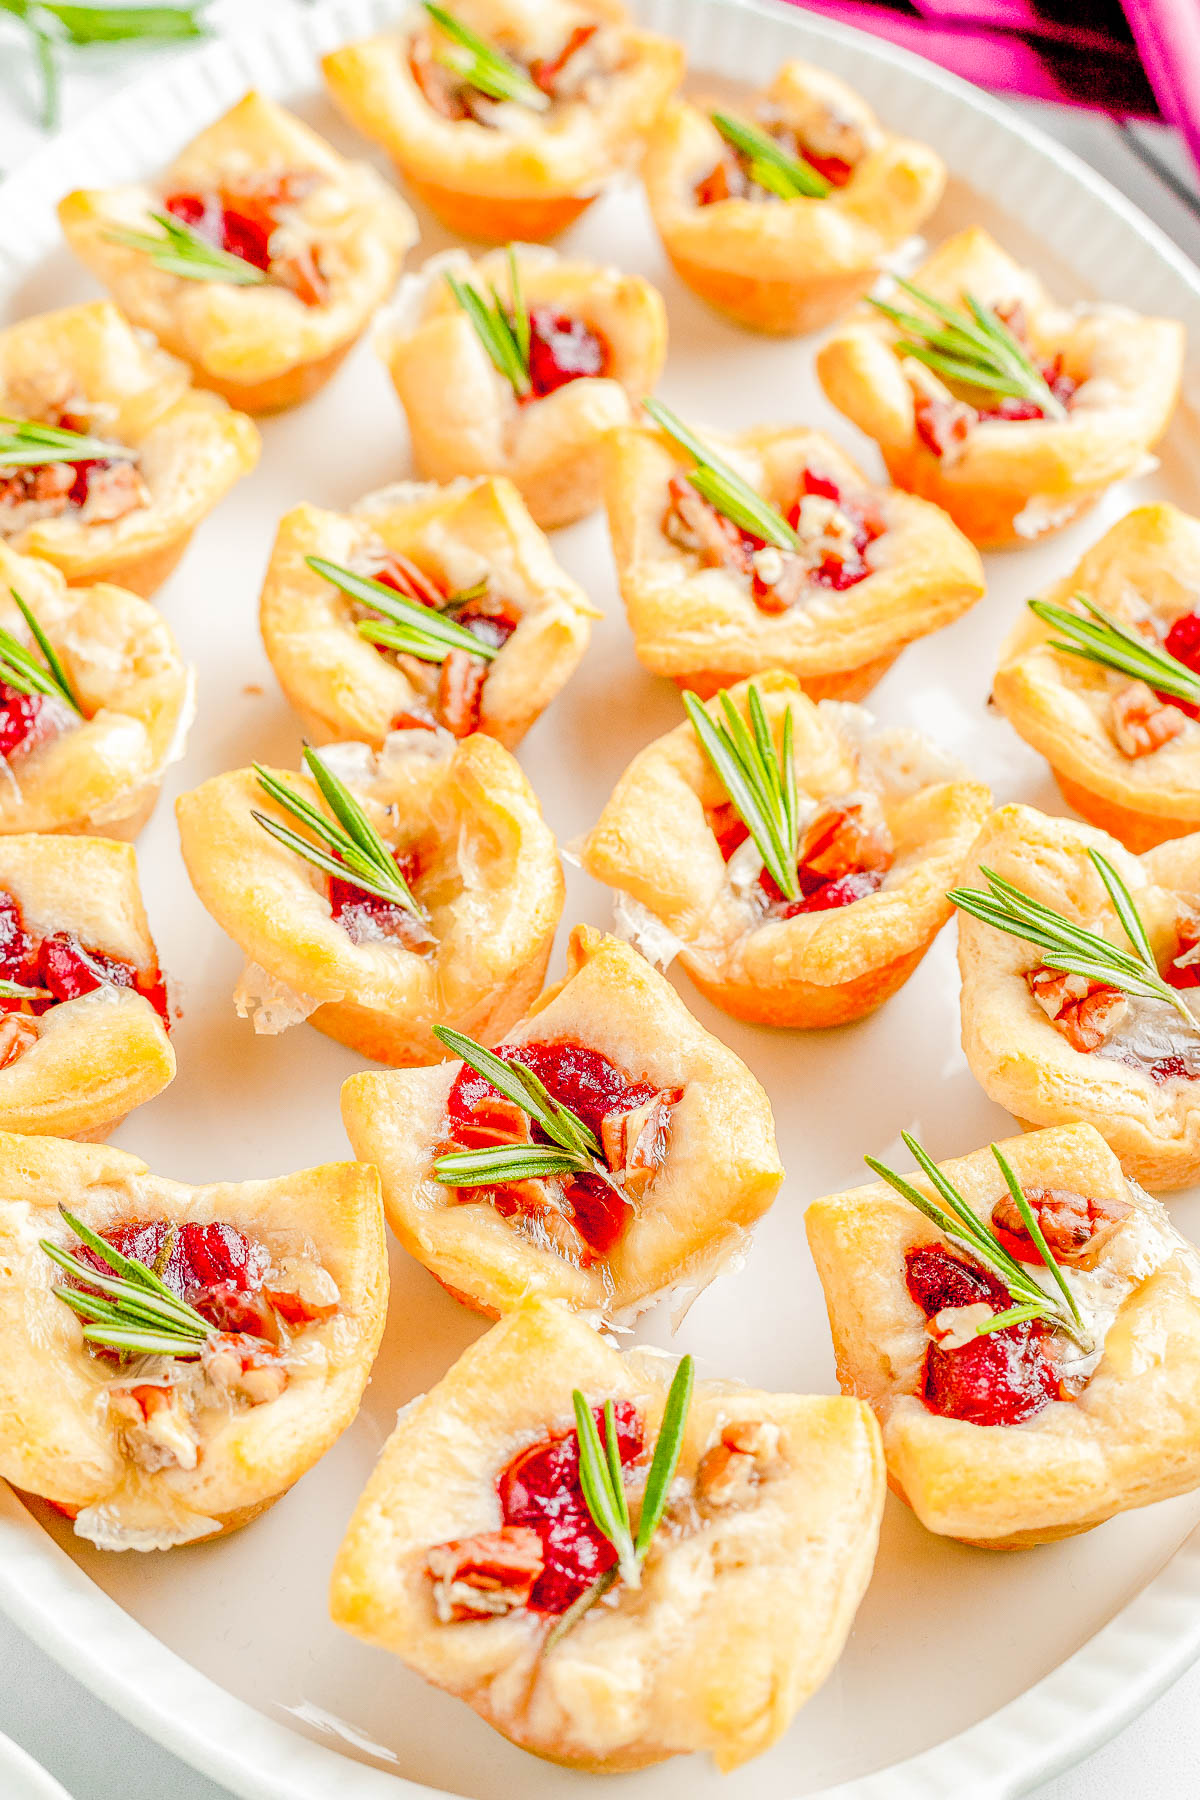 Cranberry Brie Bites - The perfect two-bite holiday appetizer recipe with melted brie cheese, sweet-tart cranberry sauce, and fresh rosemary all nestled inside a buttery soft crust! An EASY appetizer recipe with just 4 main ingredients that's ready in 30 minutes! PERFECT for Thanksgiving celebrations, holiday and Christmas parties, or for New Year's Eve! 